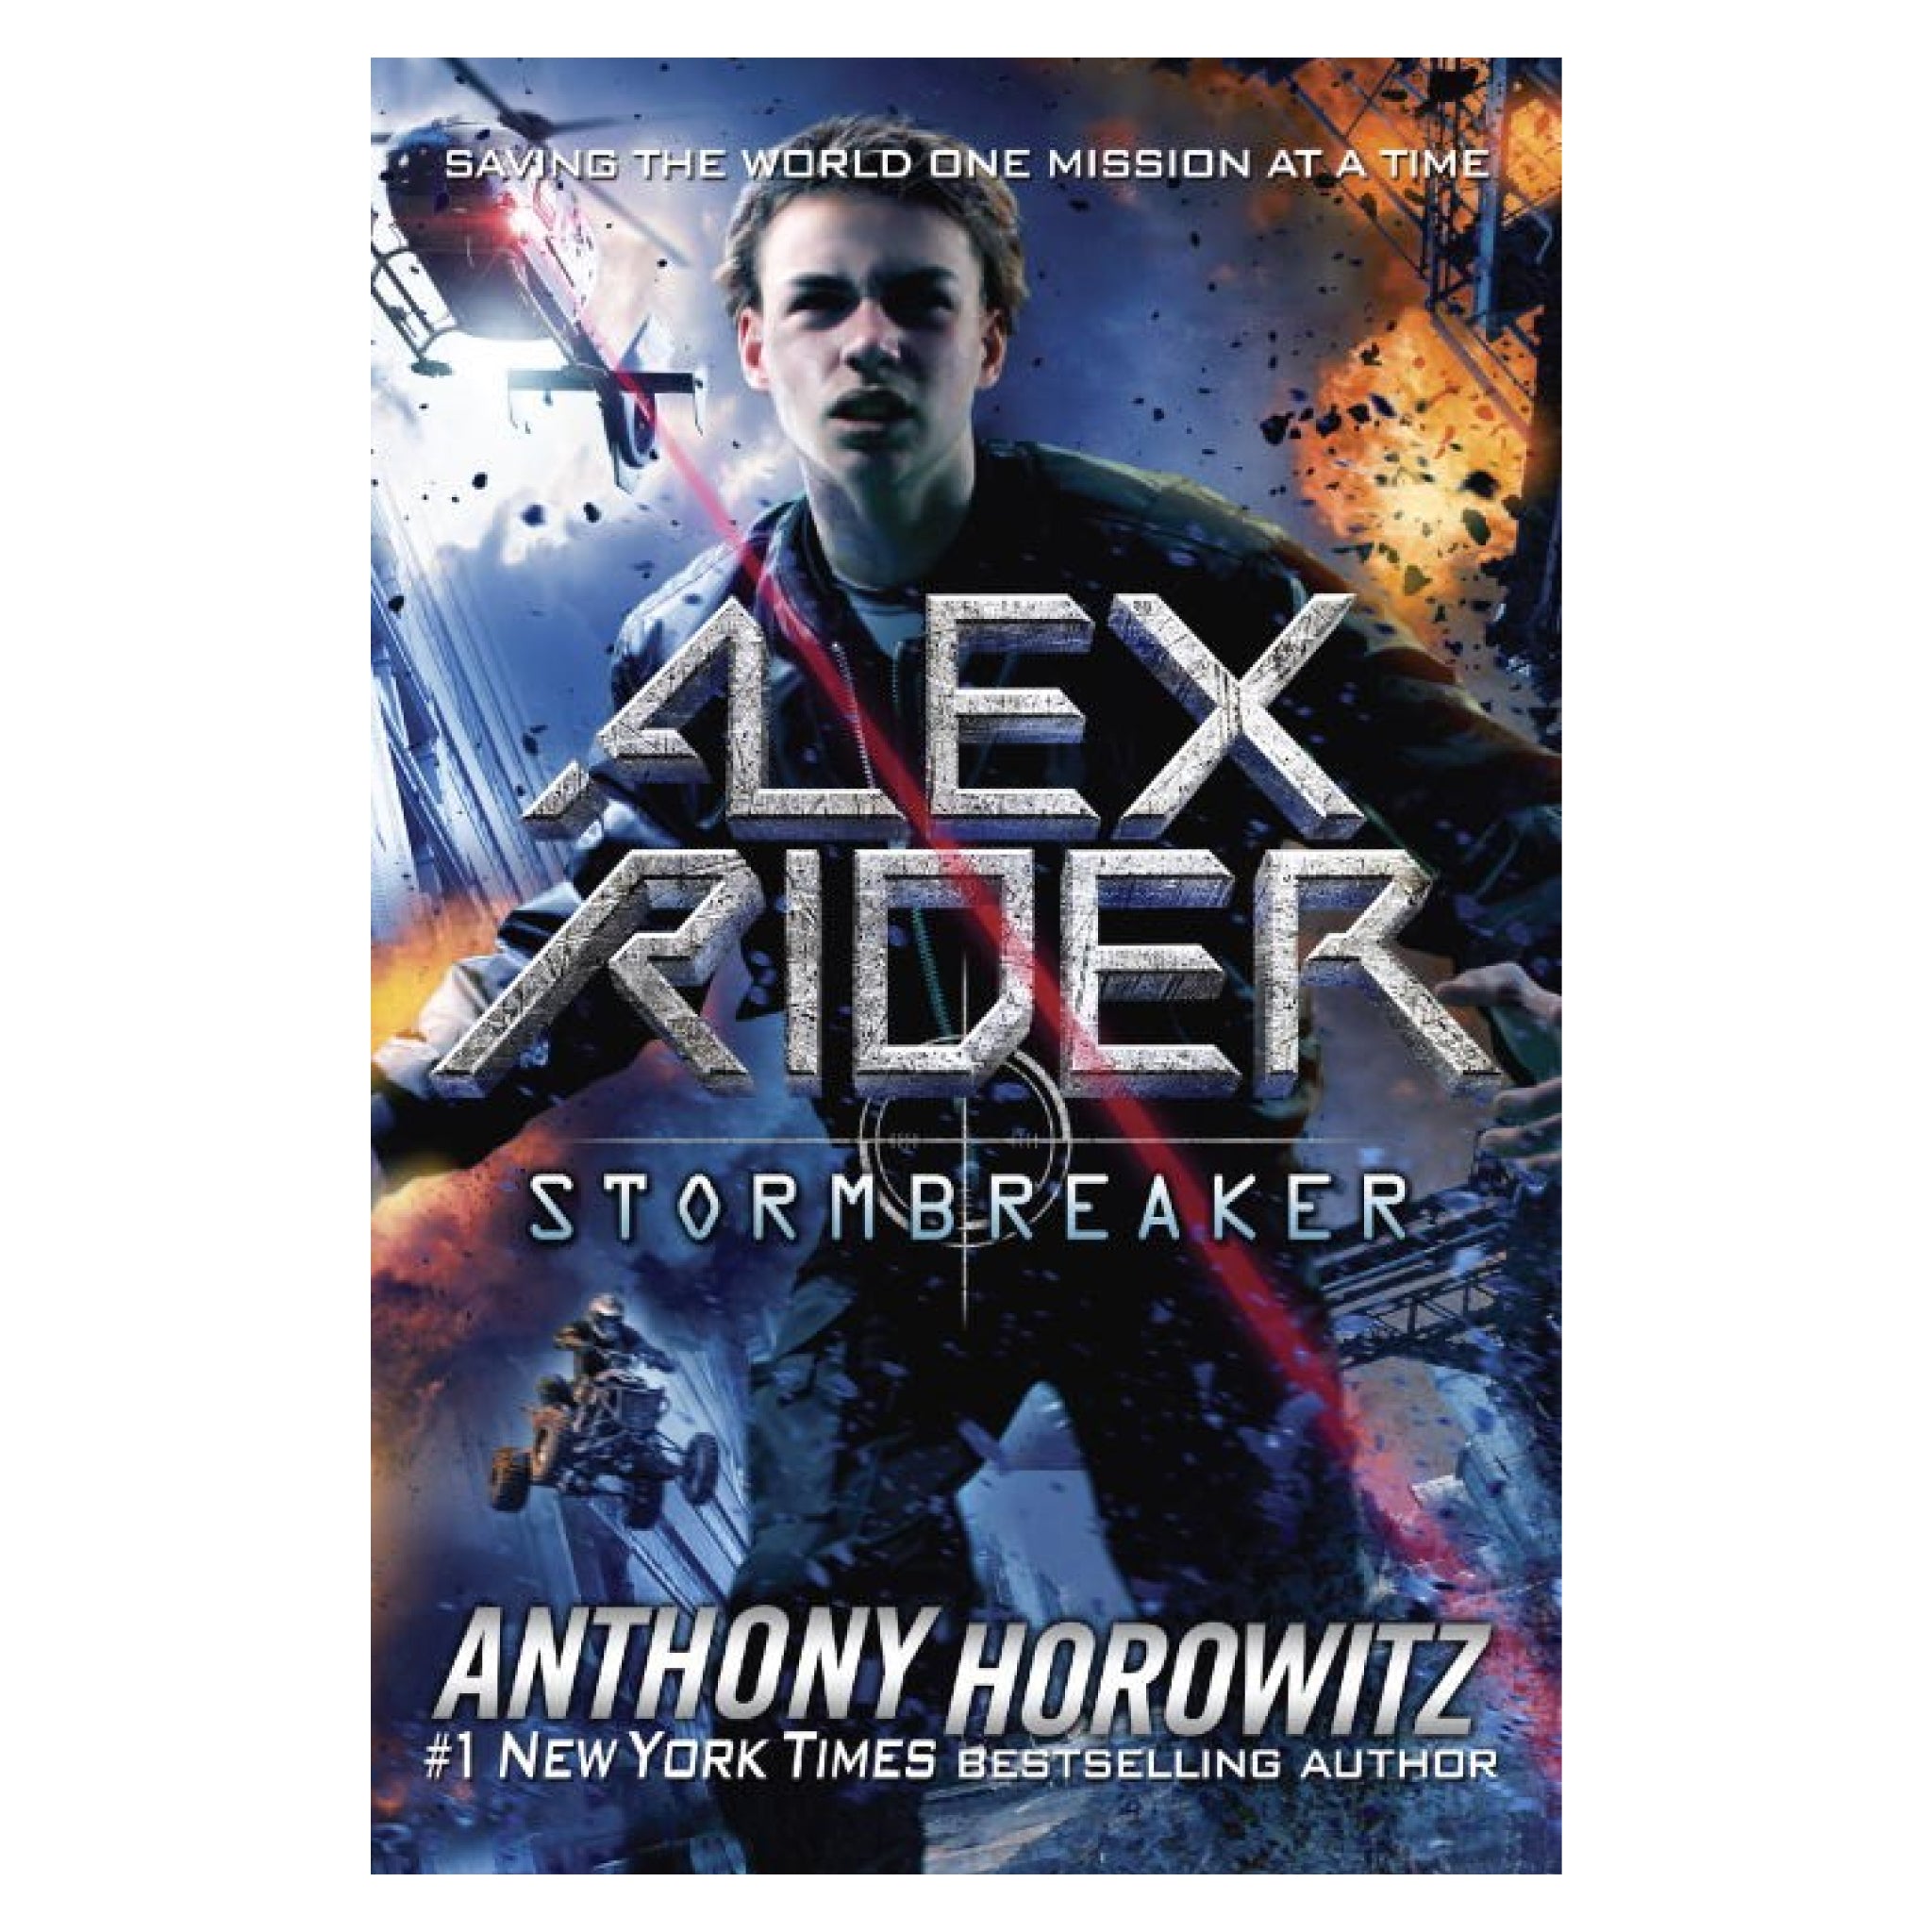 Russian Roulette (Alex Rider, #10) by Anthony Horowitz